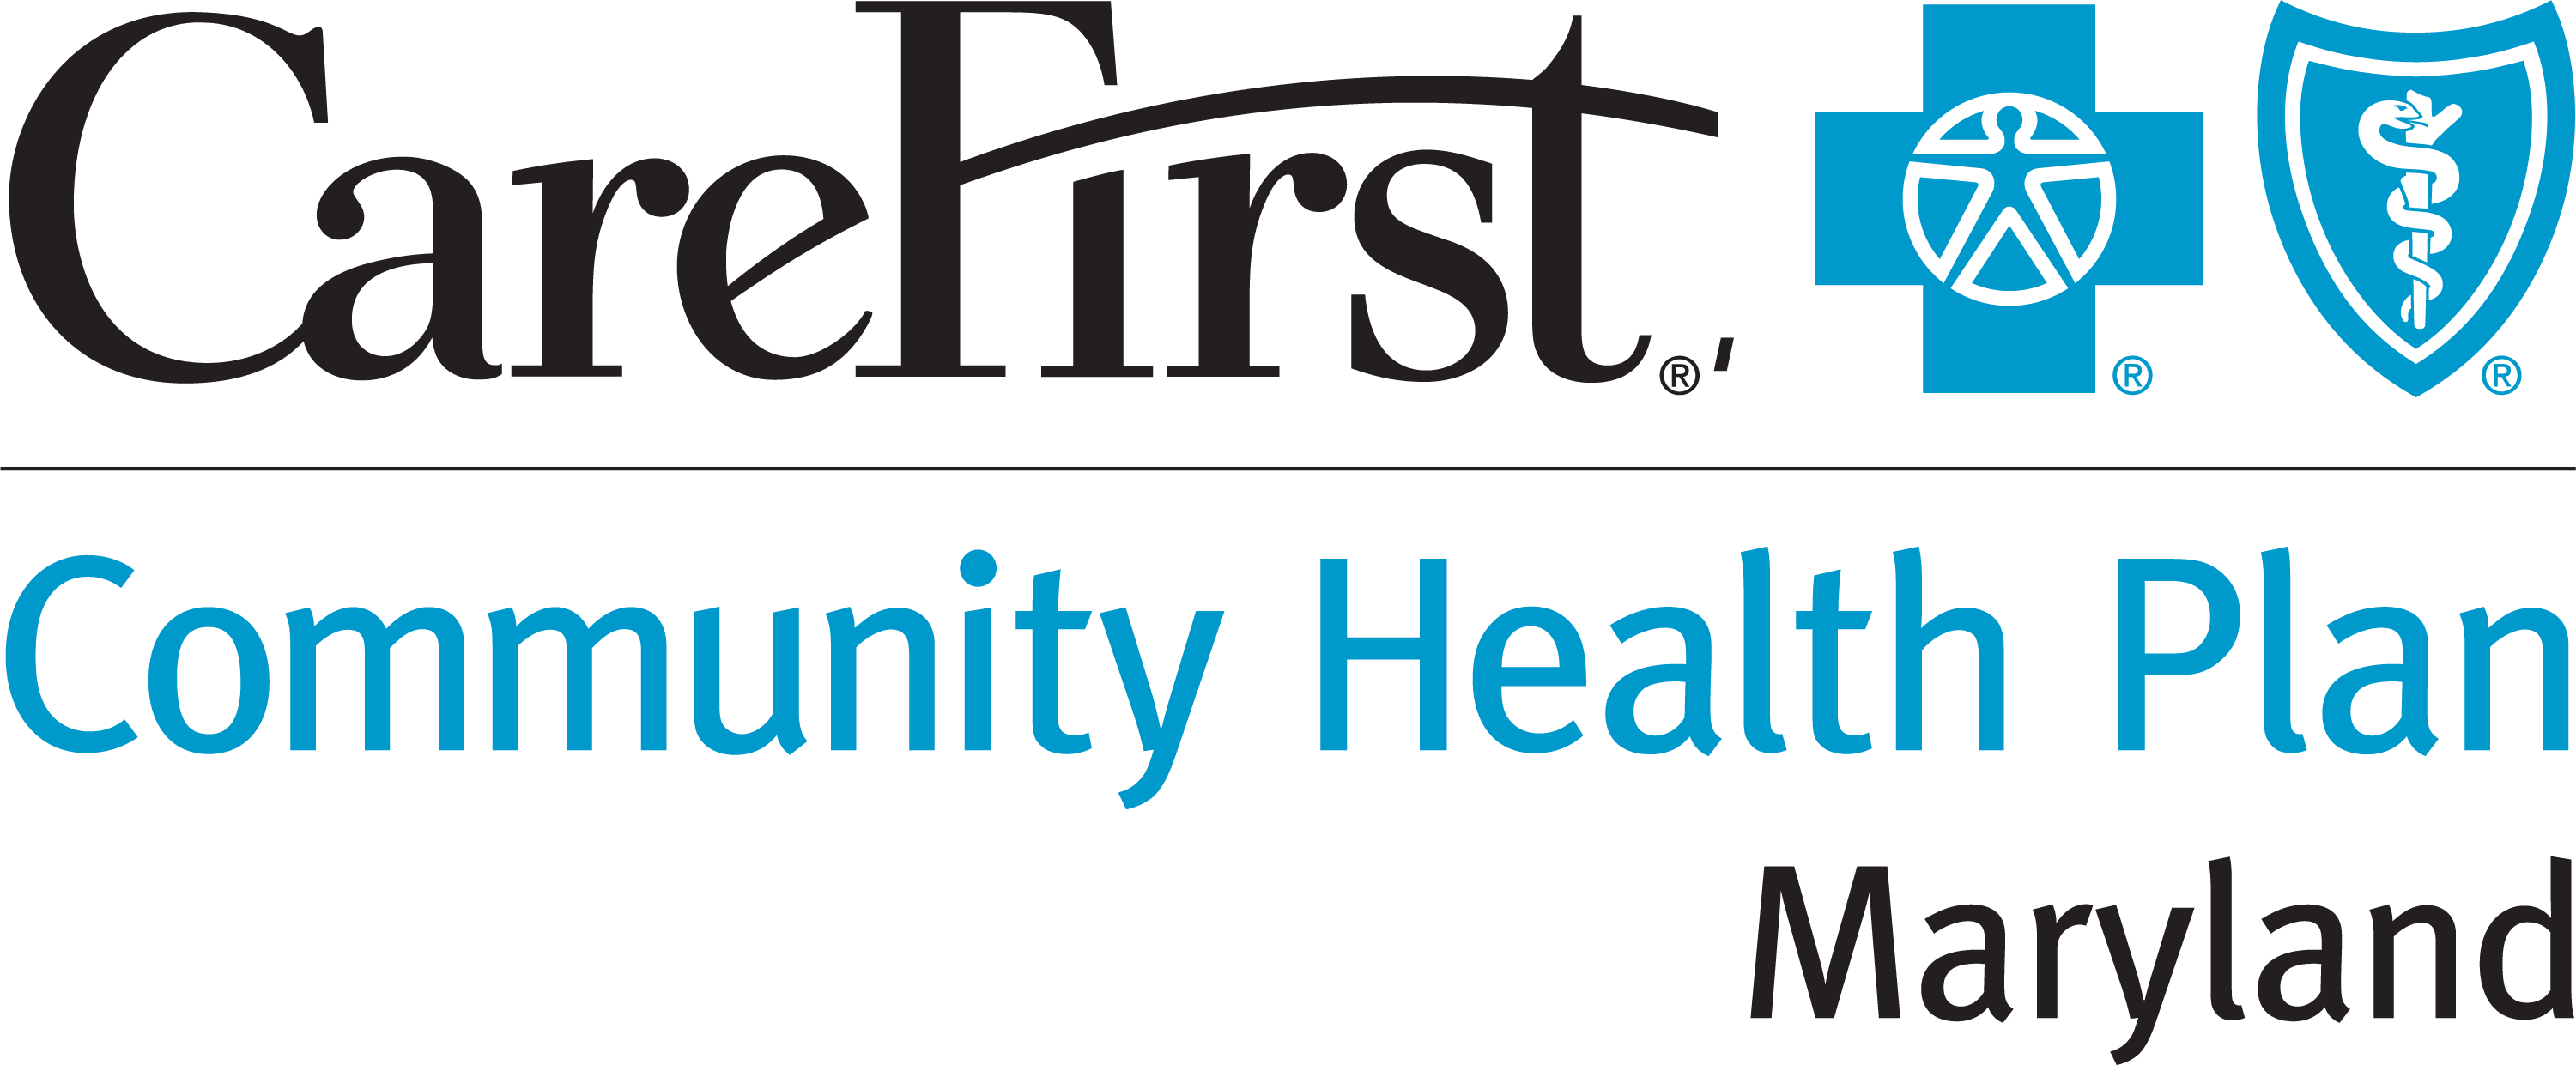 Carefirst 1 800 number for providers 190 baxter drive athens ga